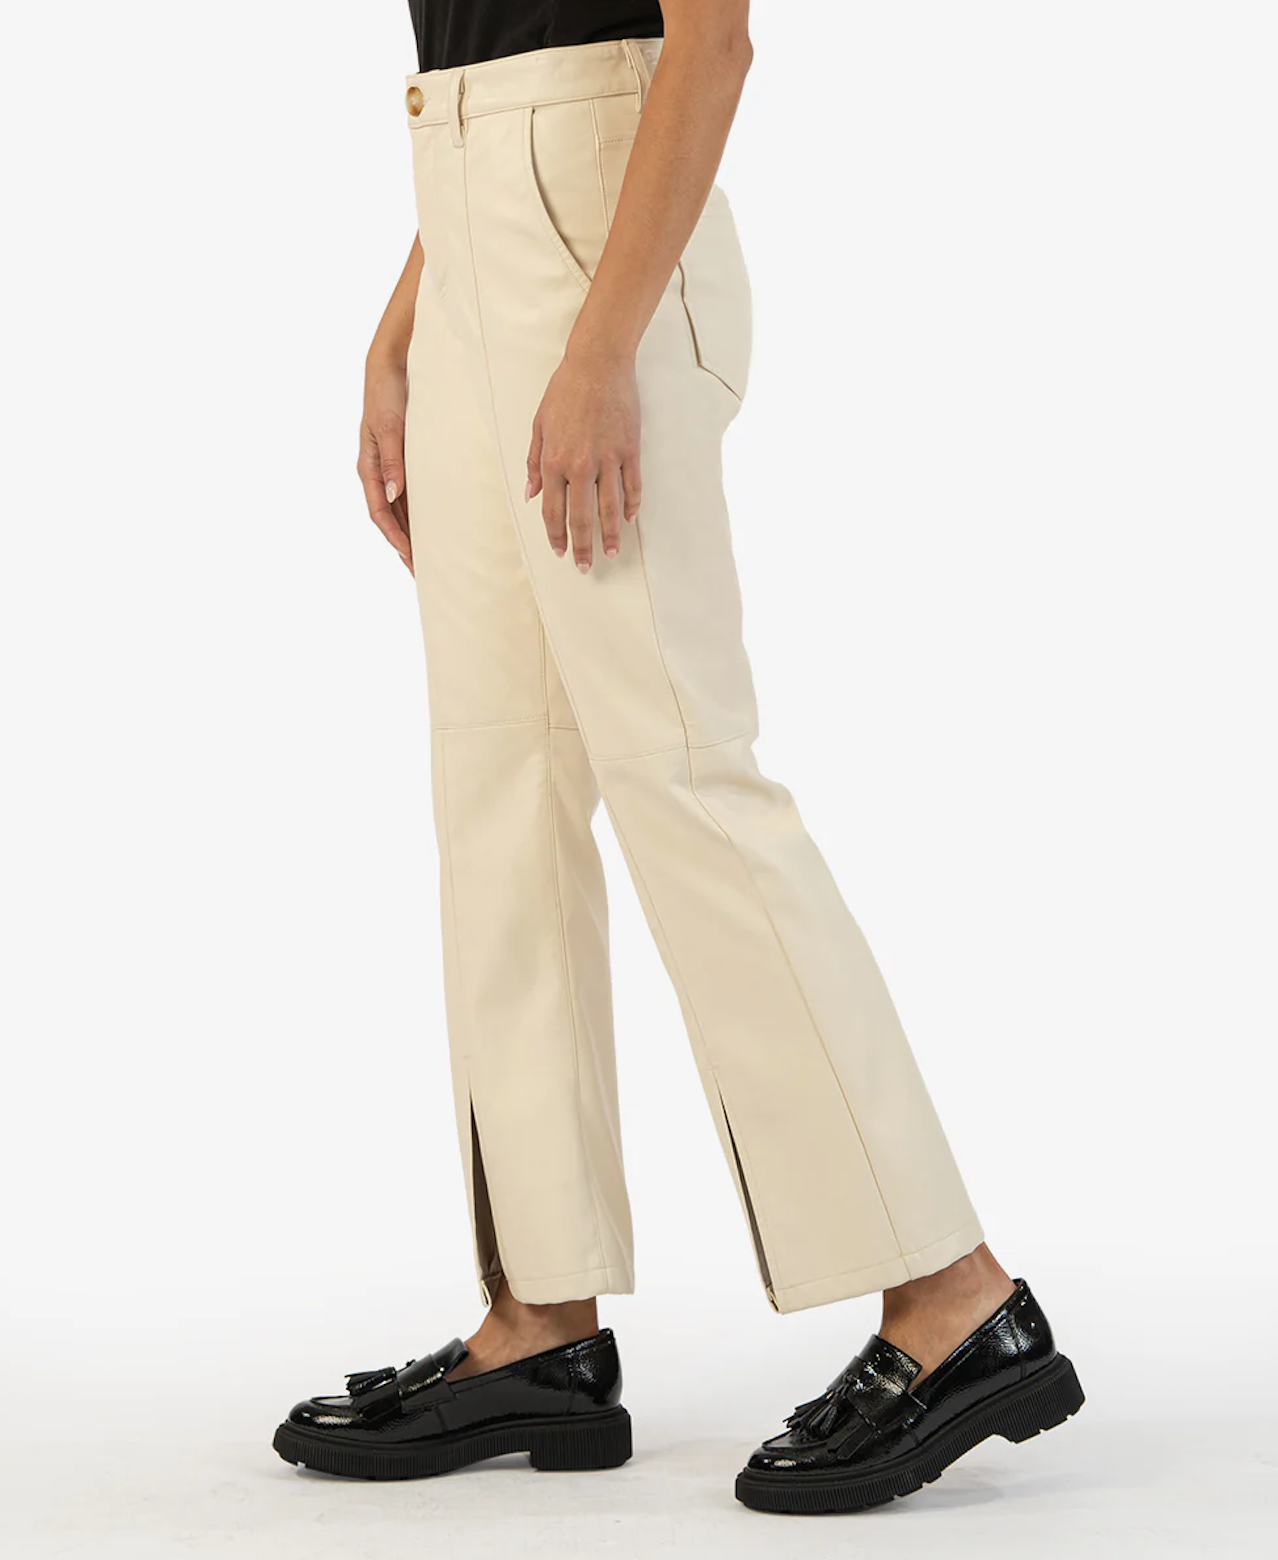 Kut from the Kloth  Pants  Jumpsuits  New Kut From The Kloth Luna High  Waist Trouser In Blush  Poshmark